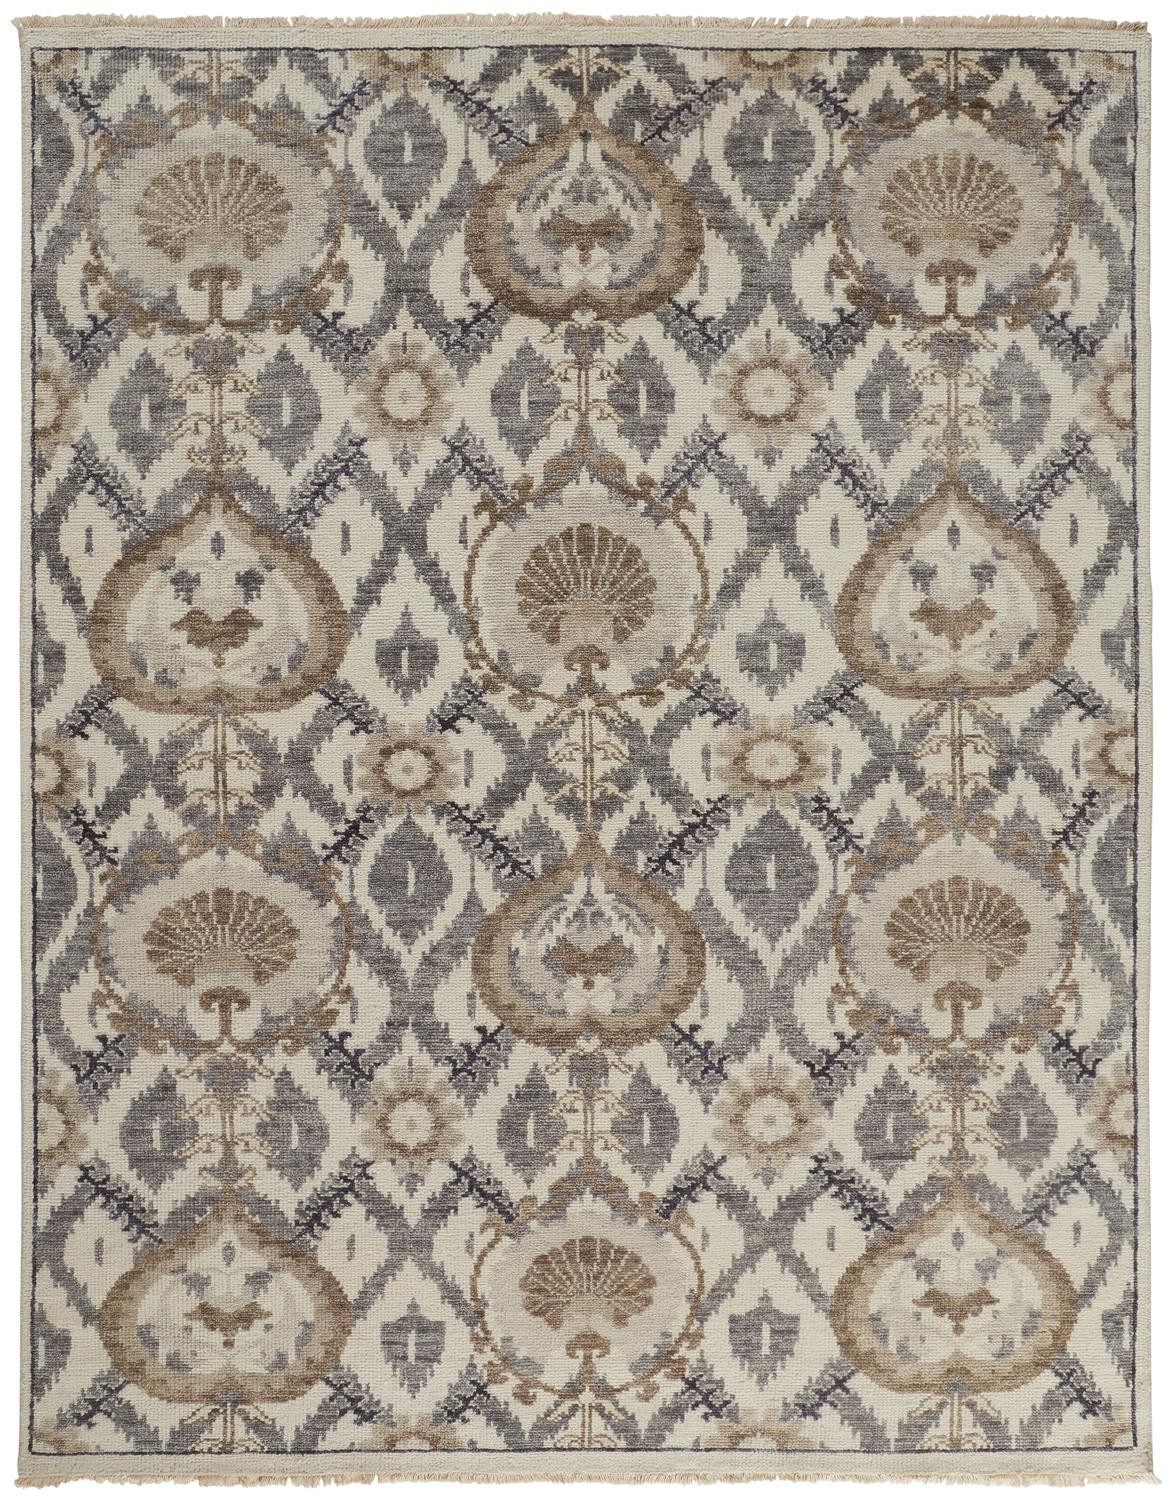 8' X 10' Ivory Gray And Taupe Wool Floral Hand Knotted Stain Resistant Area Rug-513104-1